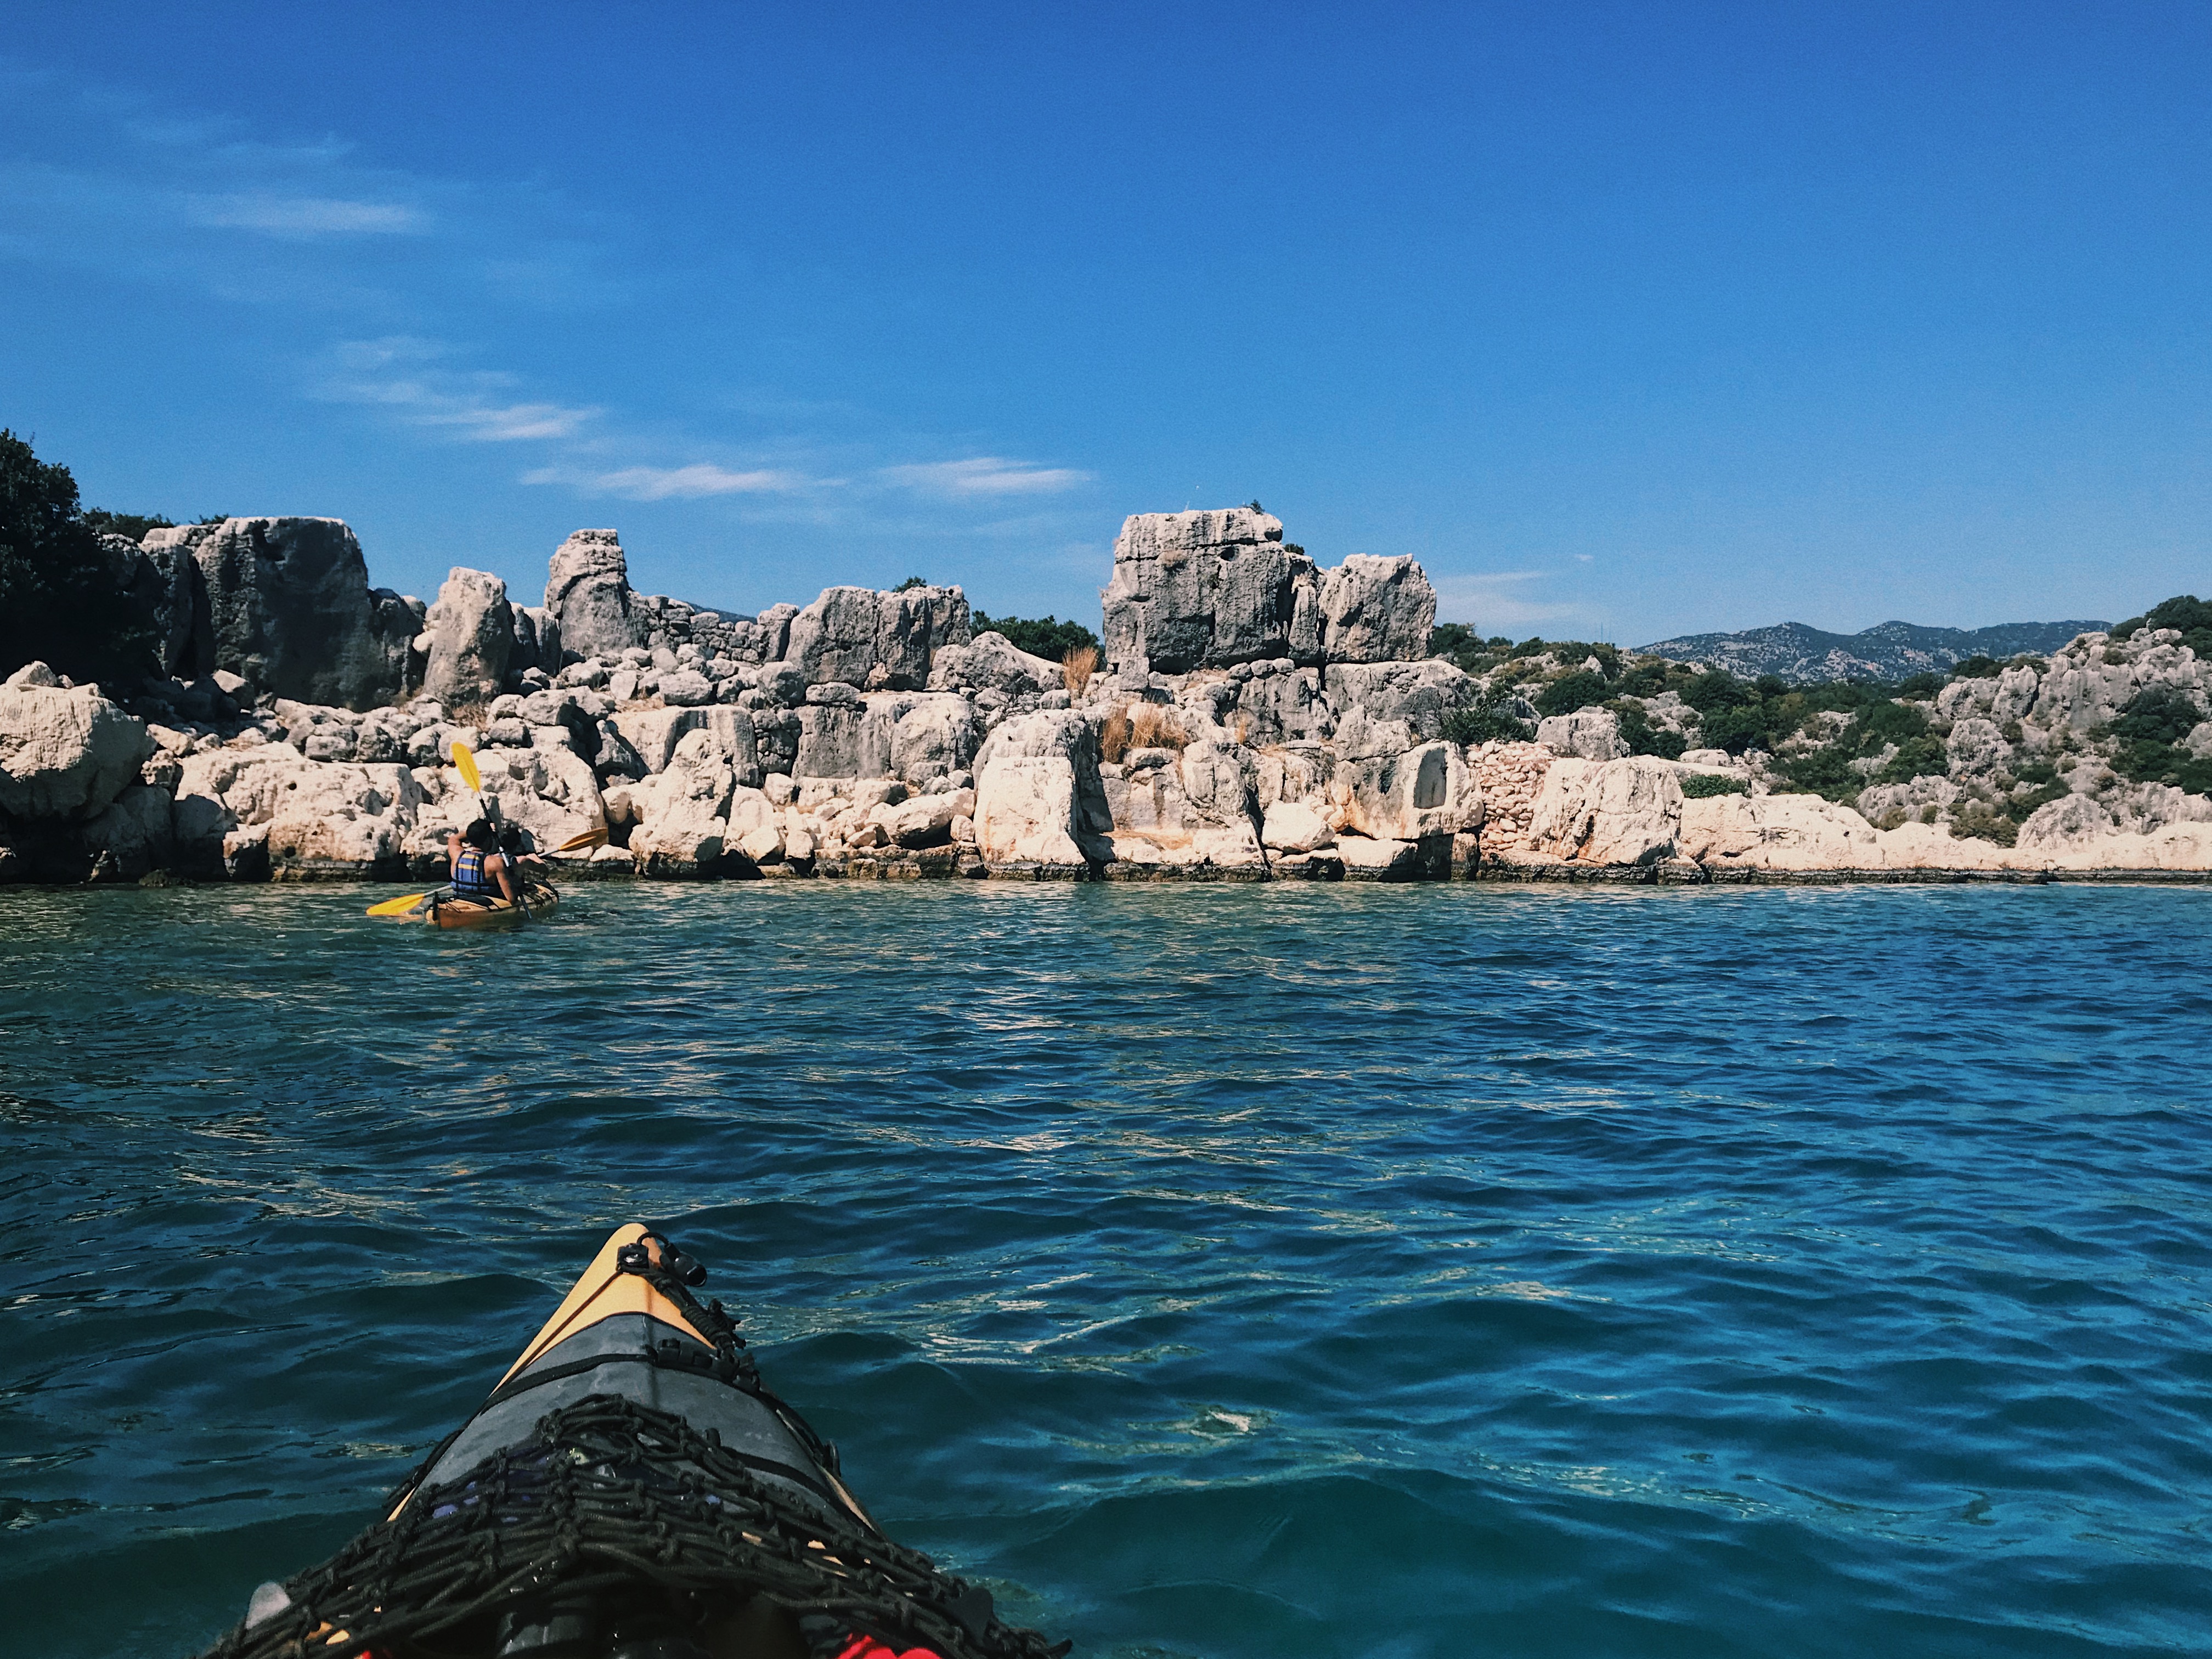 A kayaker paddles through the clear blue waters of Kaş, Turkey, approaching a rugged shoreline with rocky outcrops and sparse vegetation. The bright, sunny sky and distant mountains create a stunning backdrop, adding to the adventurous and scenic nature of this coastal destination. The perspective from another kayak emphasizes the immersive experience of exploring this beautiful landscape.